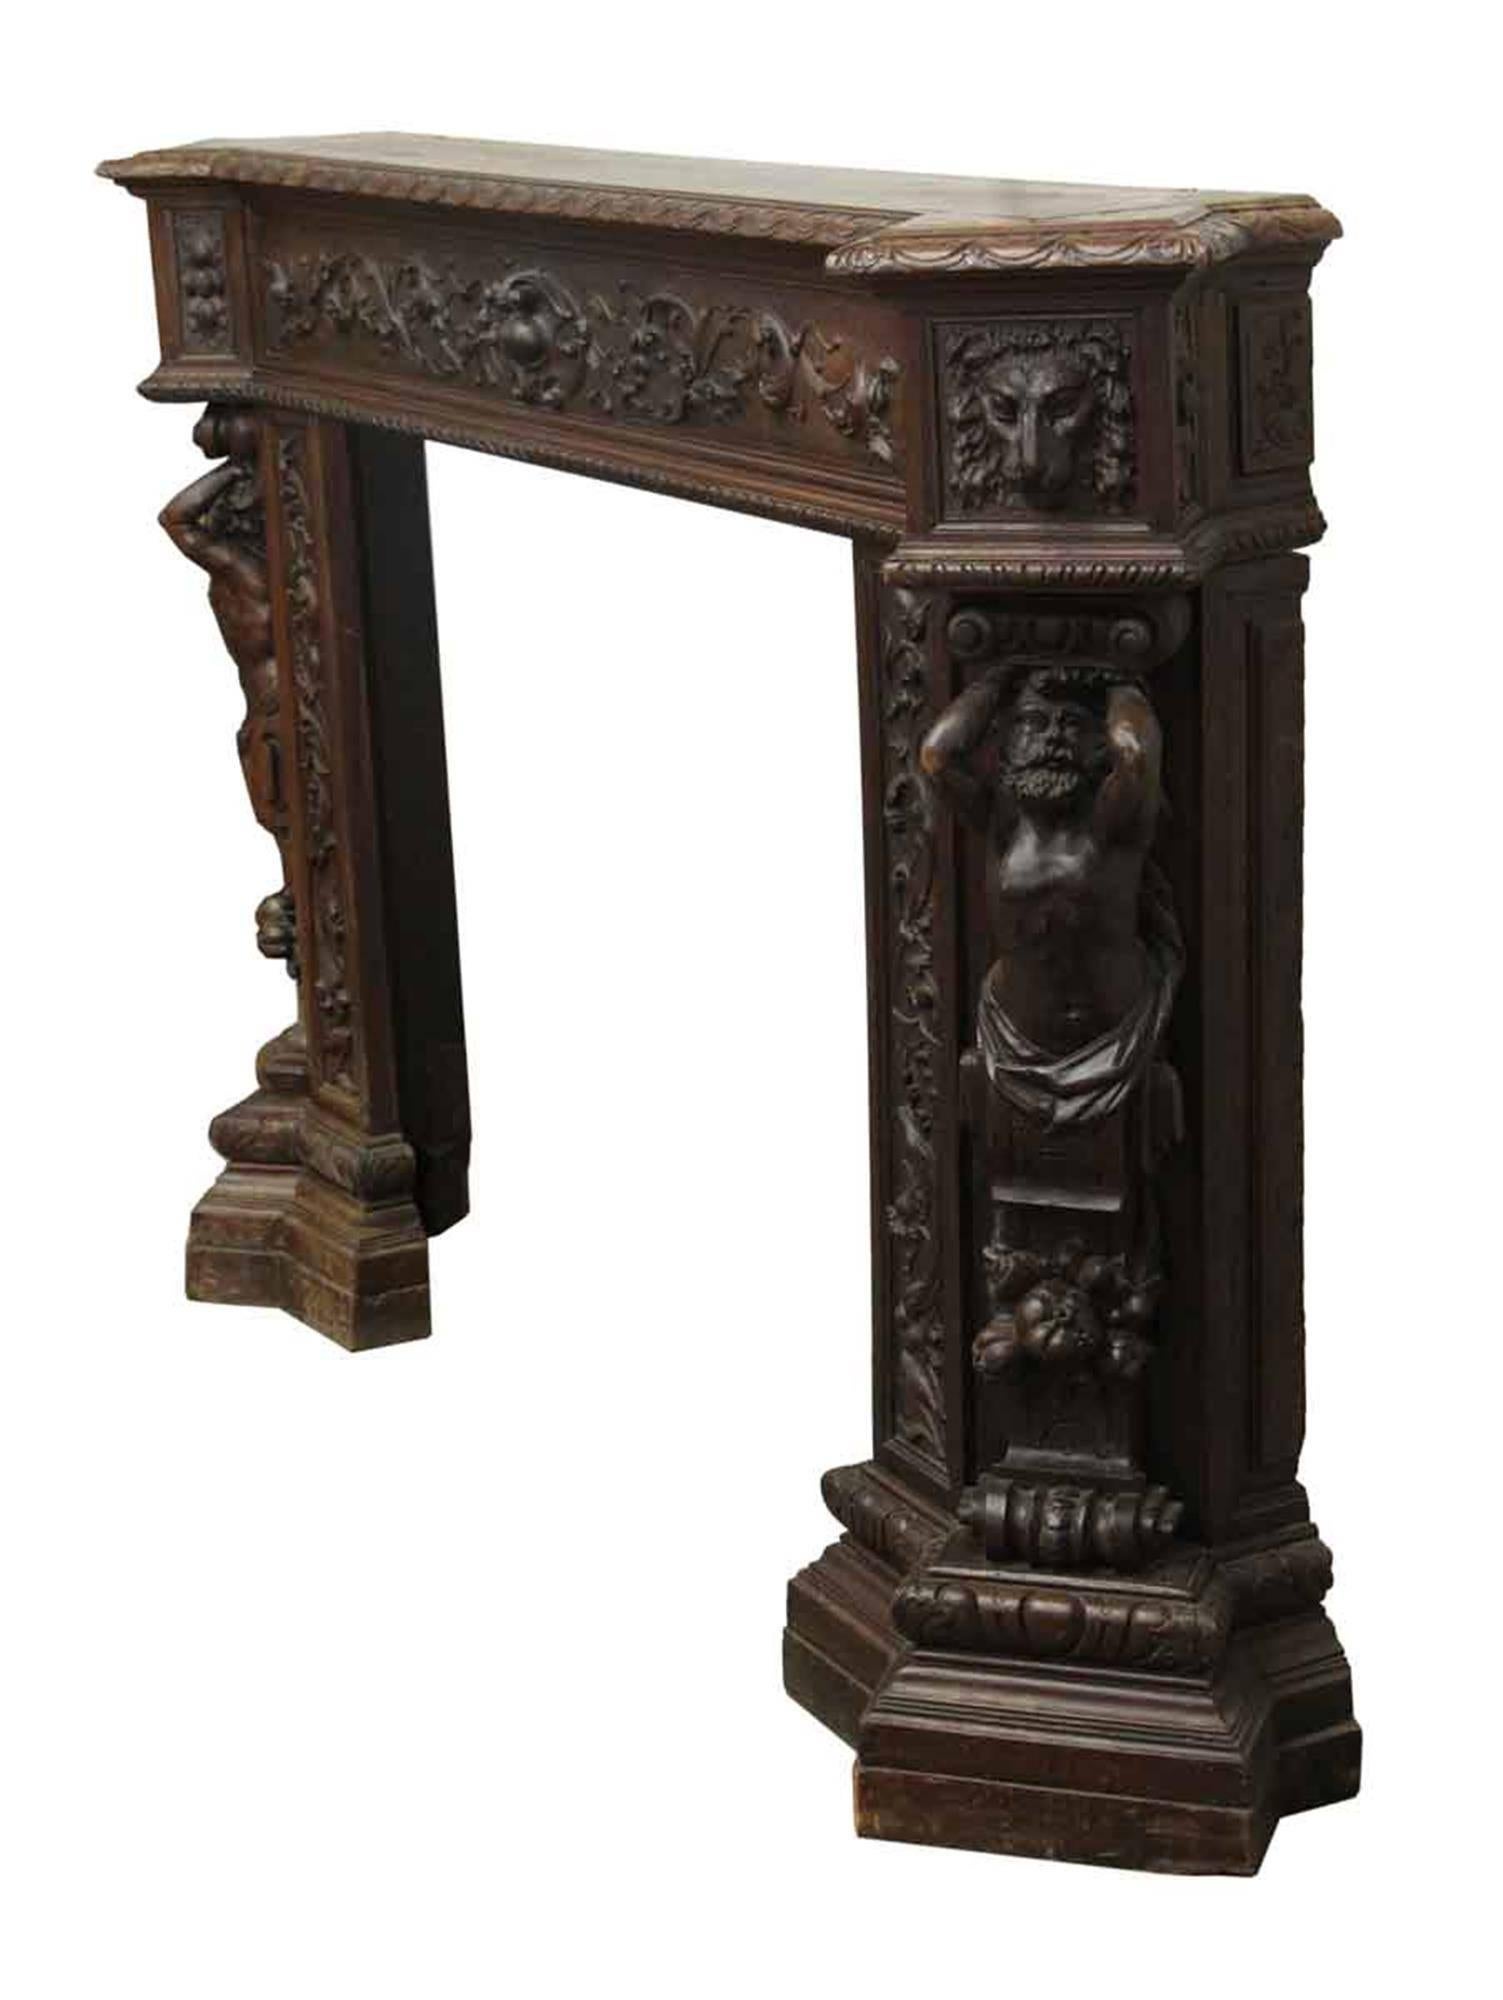 Hand carved mahogany mantel, which was one part of a room with additional hand carved architecture. Made in the early 1900s. Please note, this item is located in our Scranton, PA location.